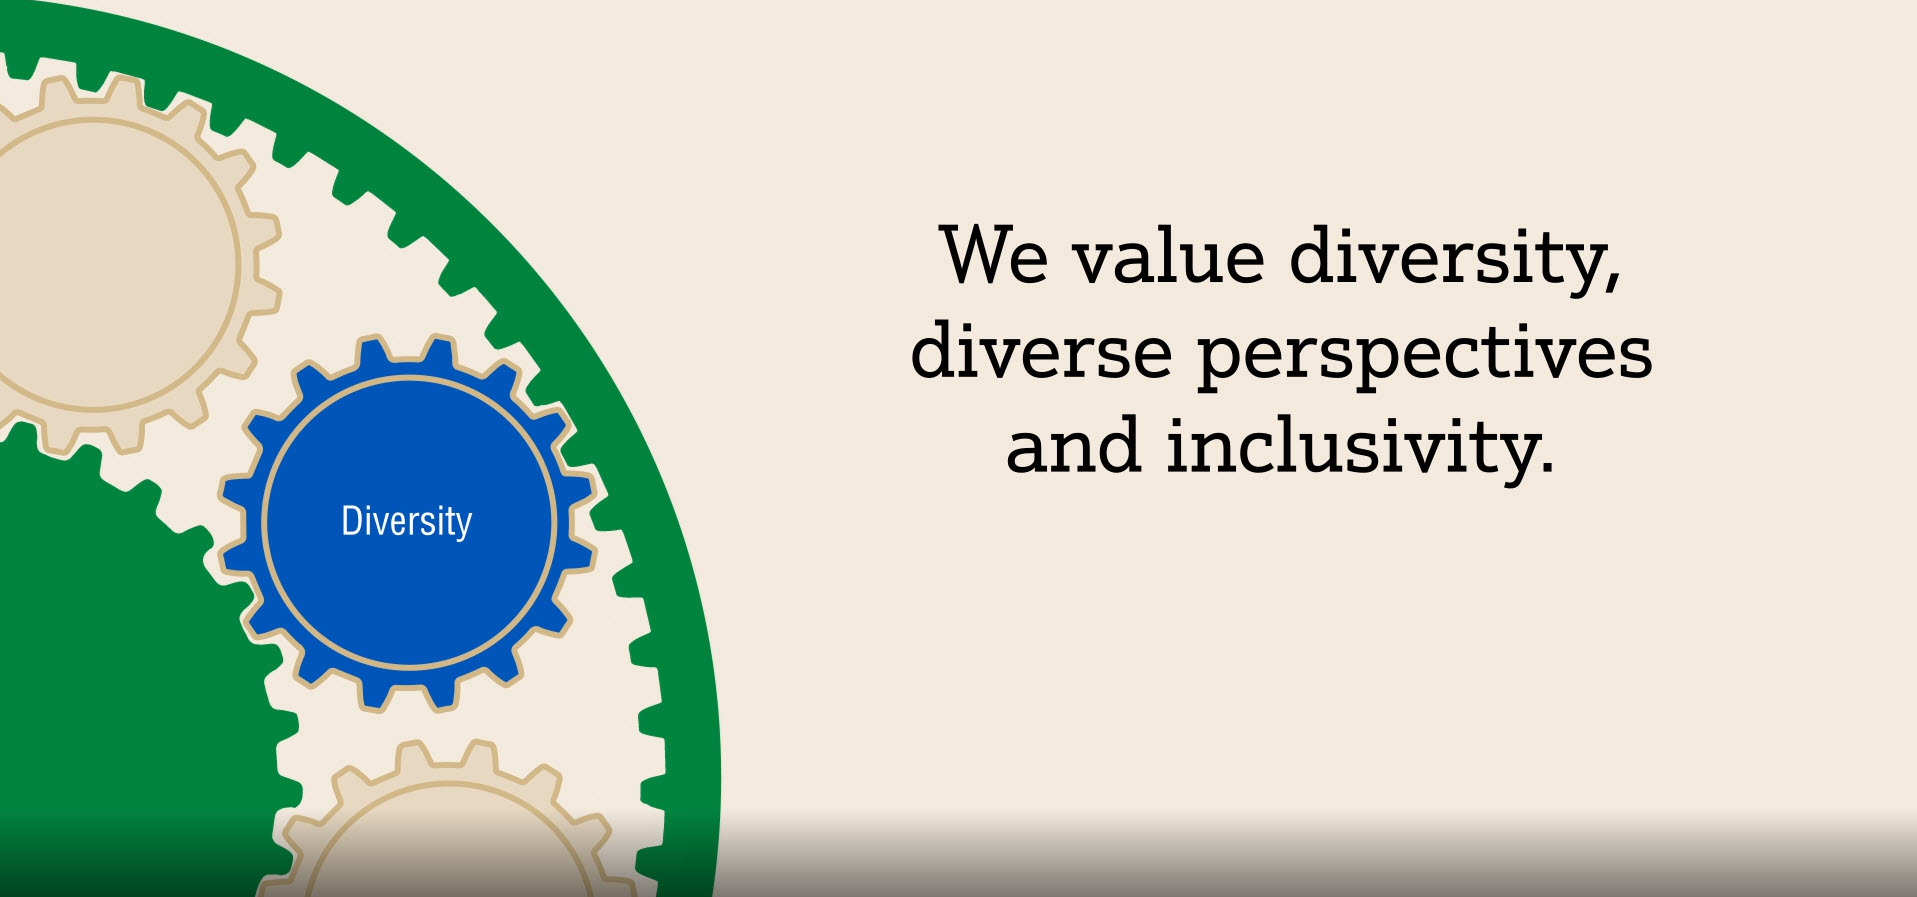 We value diversity, diverse perspectives and inclusivity.